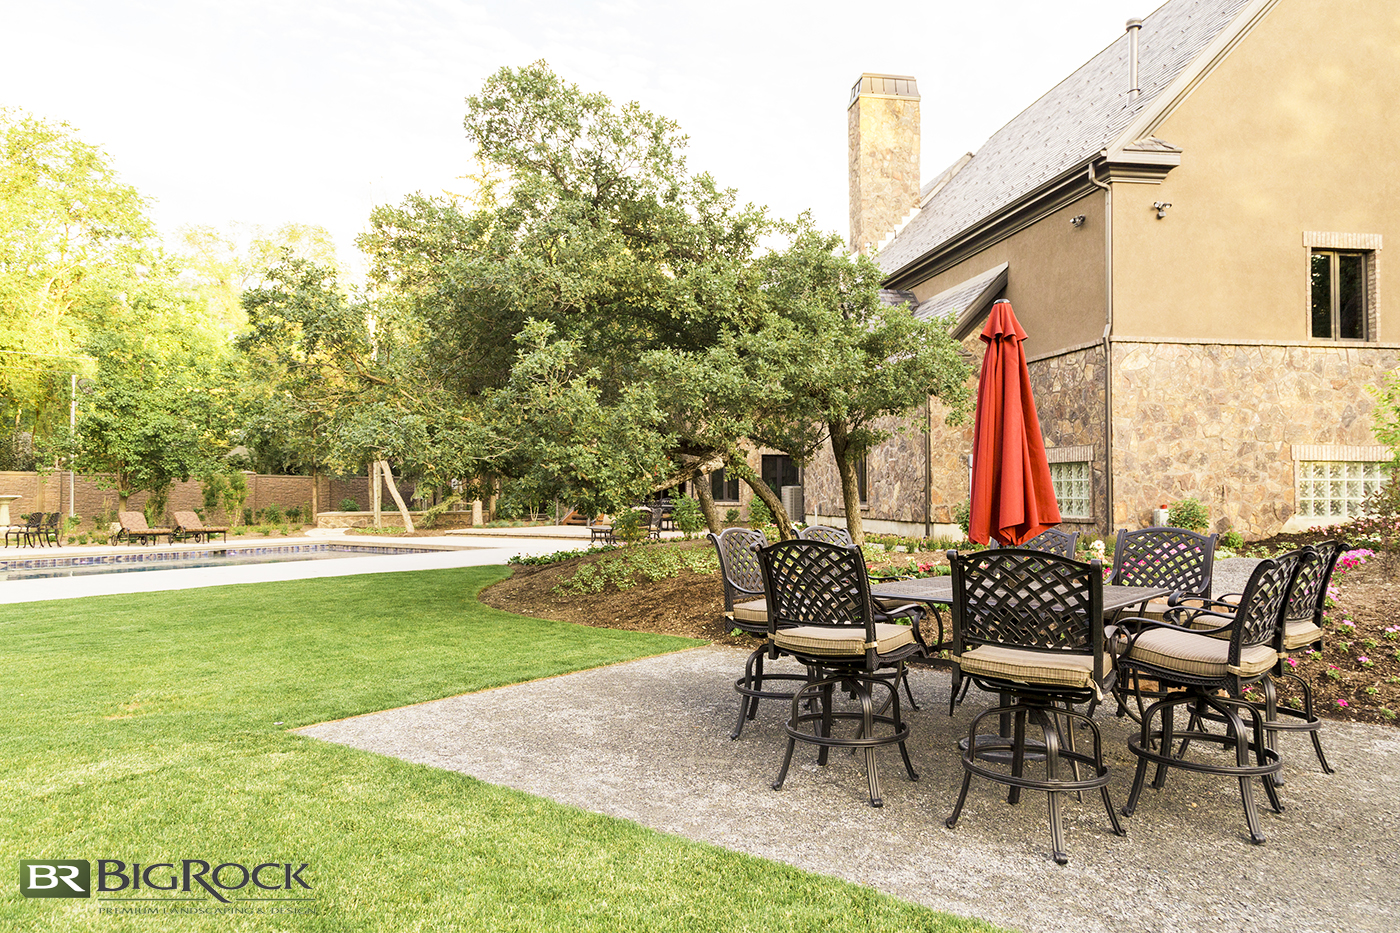 Backyard patios extend your living square footage. Let Big Rock Landscaping design an outdoor living area you eat, entertain and relax in.